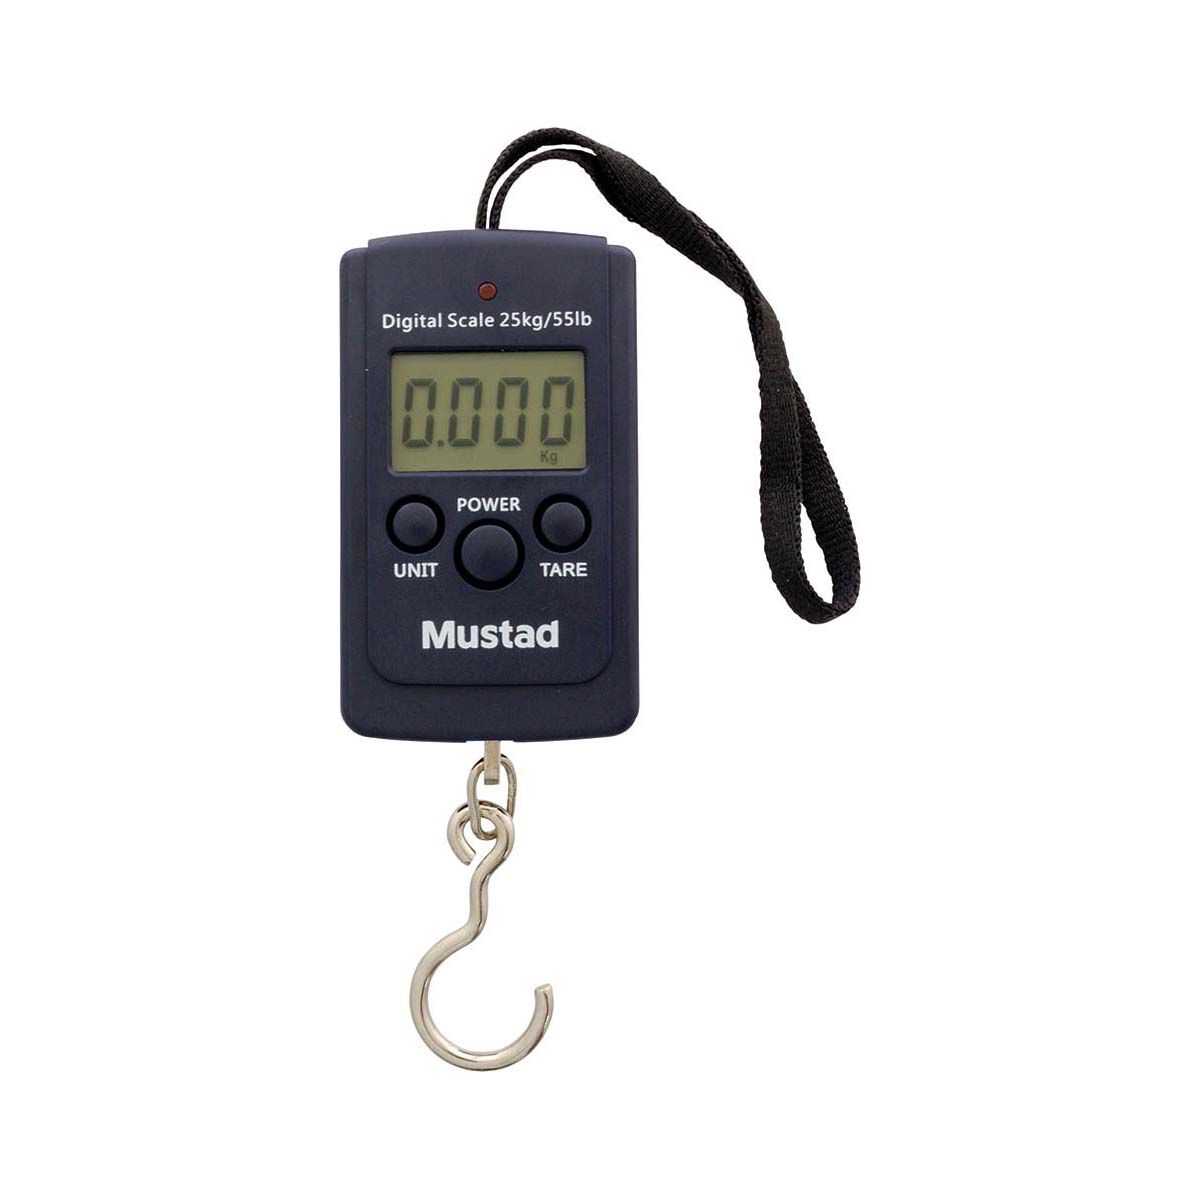 Fishing Scales & Lip Grips For Sale Online Australia